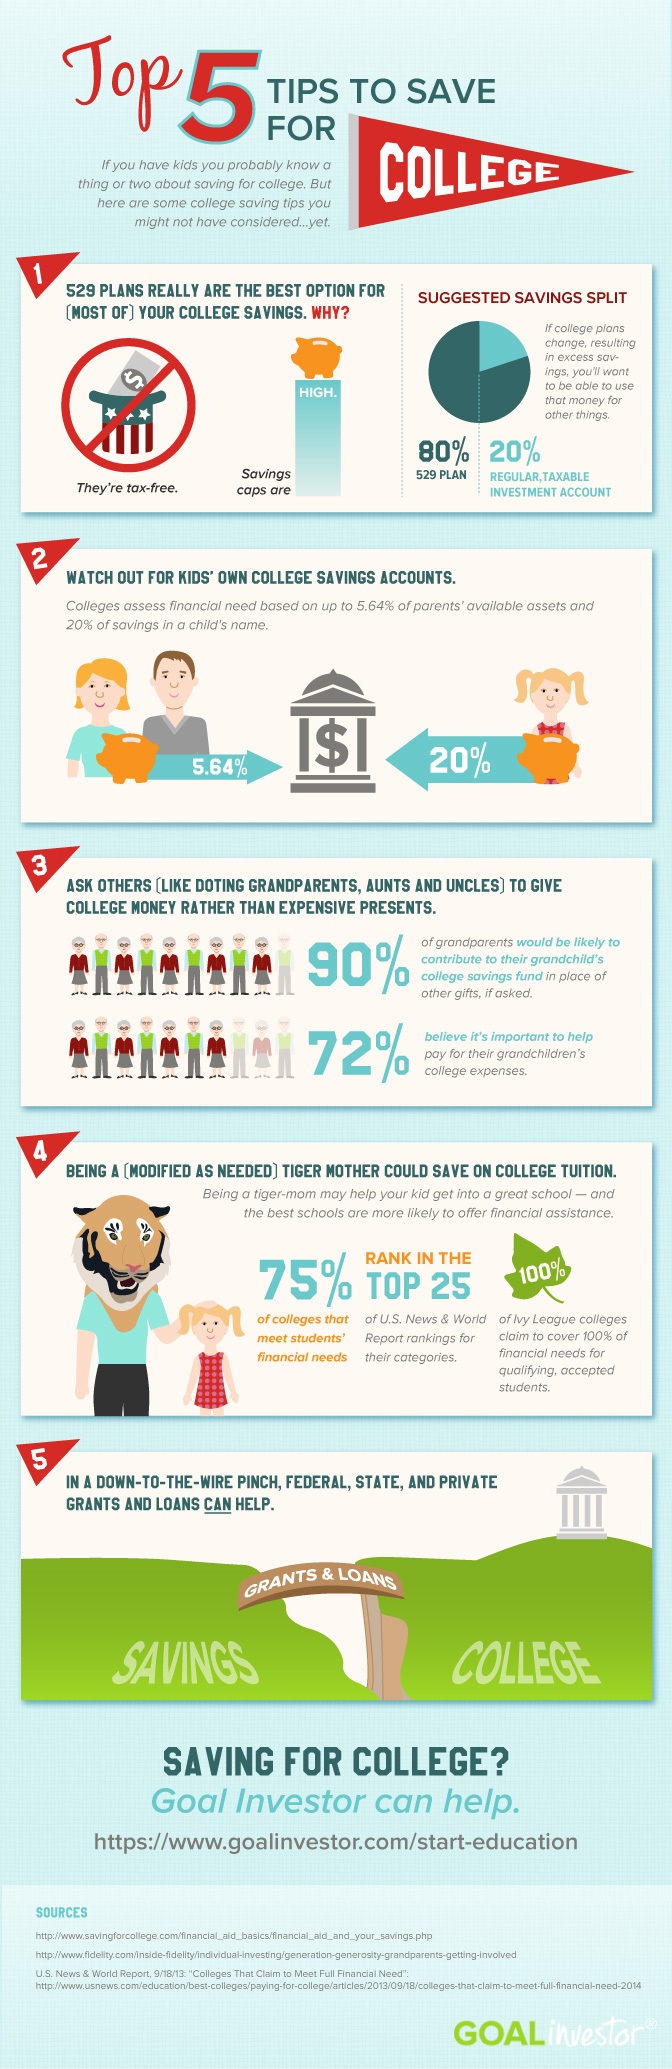 Top 5 Tips to Save for College Infographic